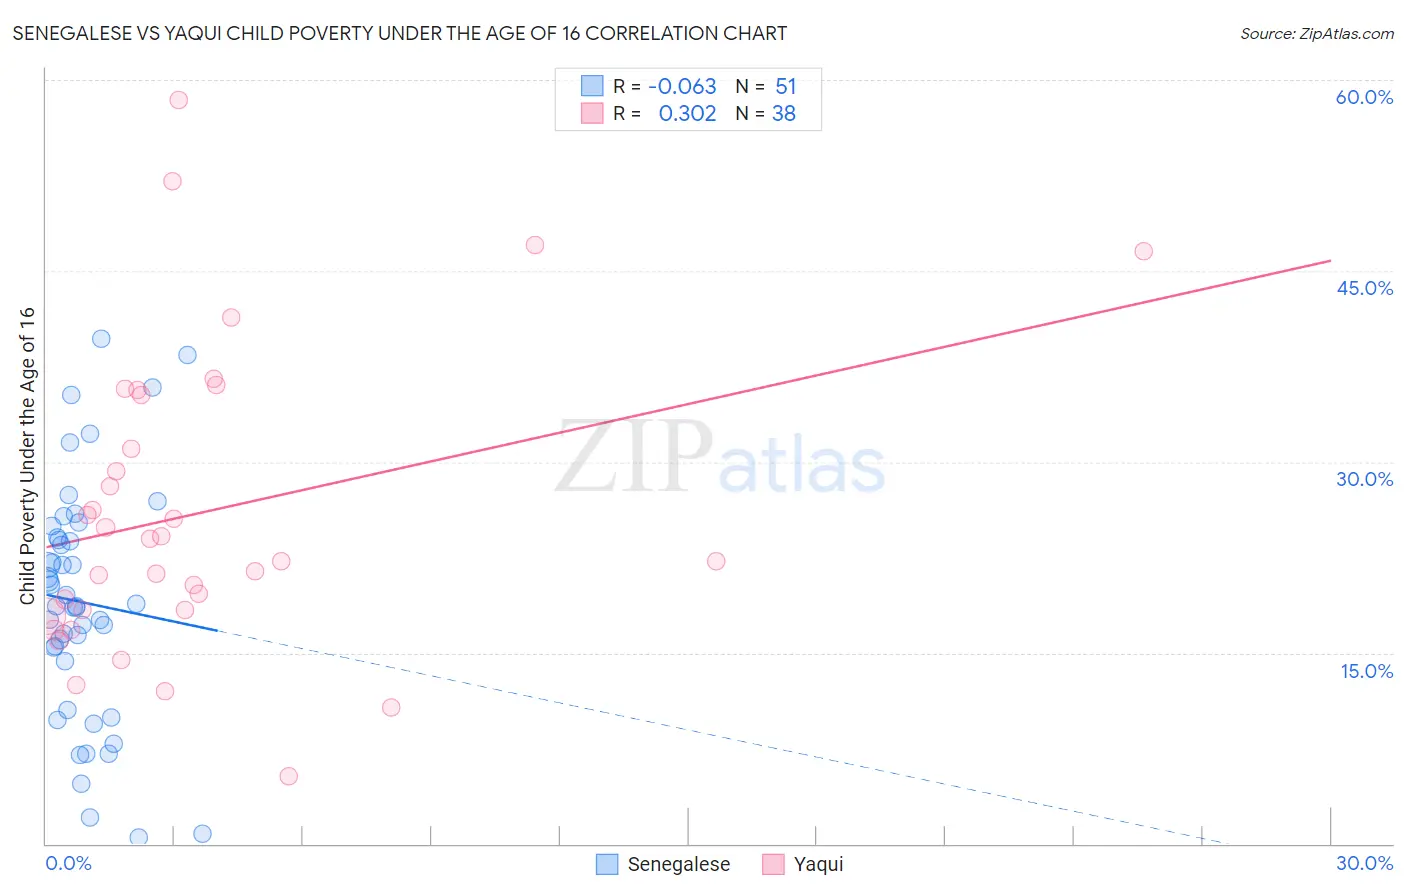 Senegalese vs Yaqui Child Poverty Under the Age of 16